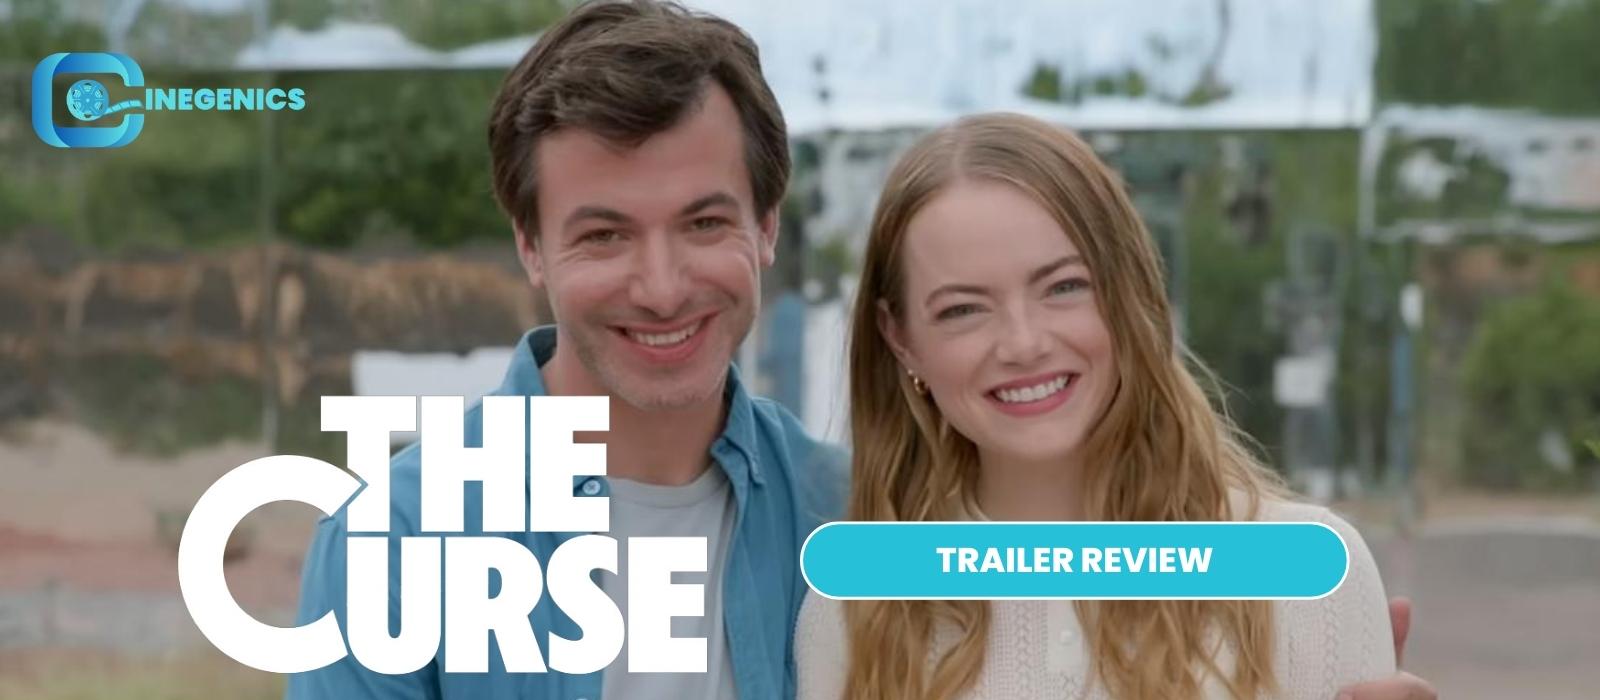 the curse trailer review | Movie Review Blogs